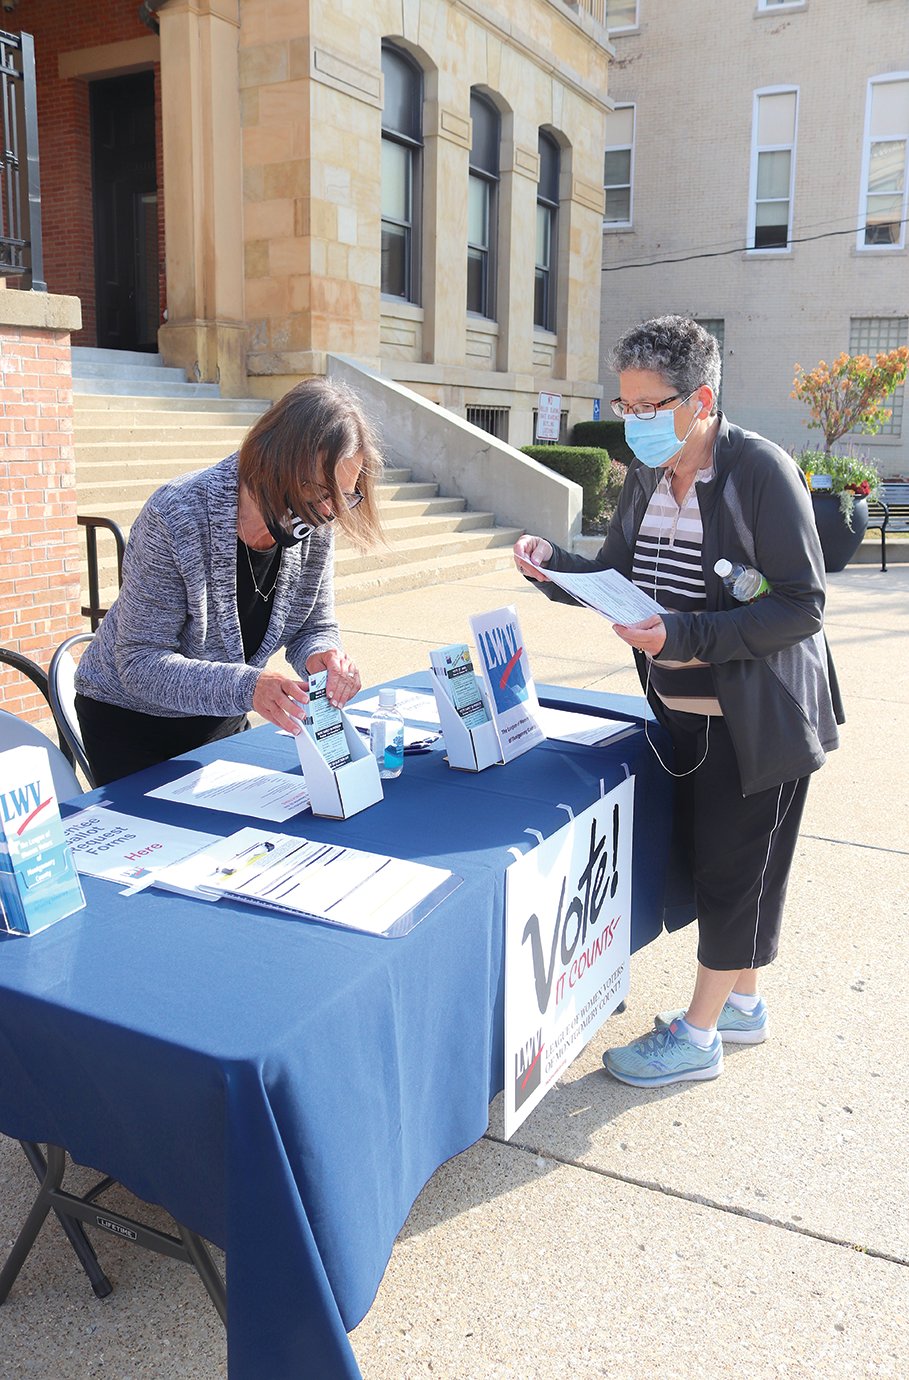 League of Women Voters volunteer Helen Hudson assists Kathy Steele with absentee ballots Tuesday on Main Street outside the Montgomery County Courthouse. Steele was on her way to a long-term care facility in Crawfordsville to deliver the absentee ballots to residents.